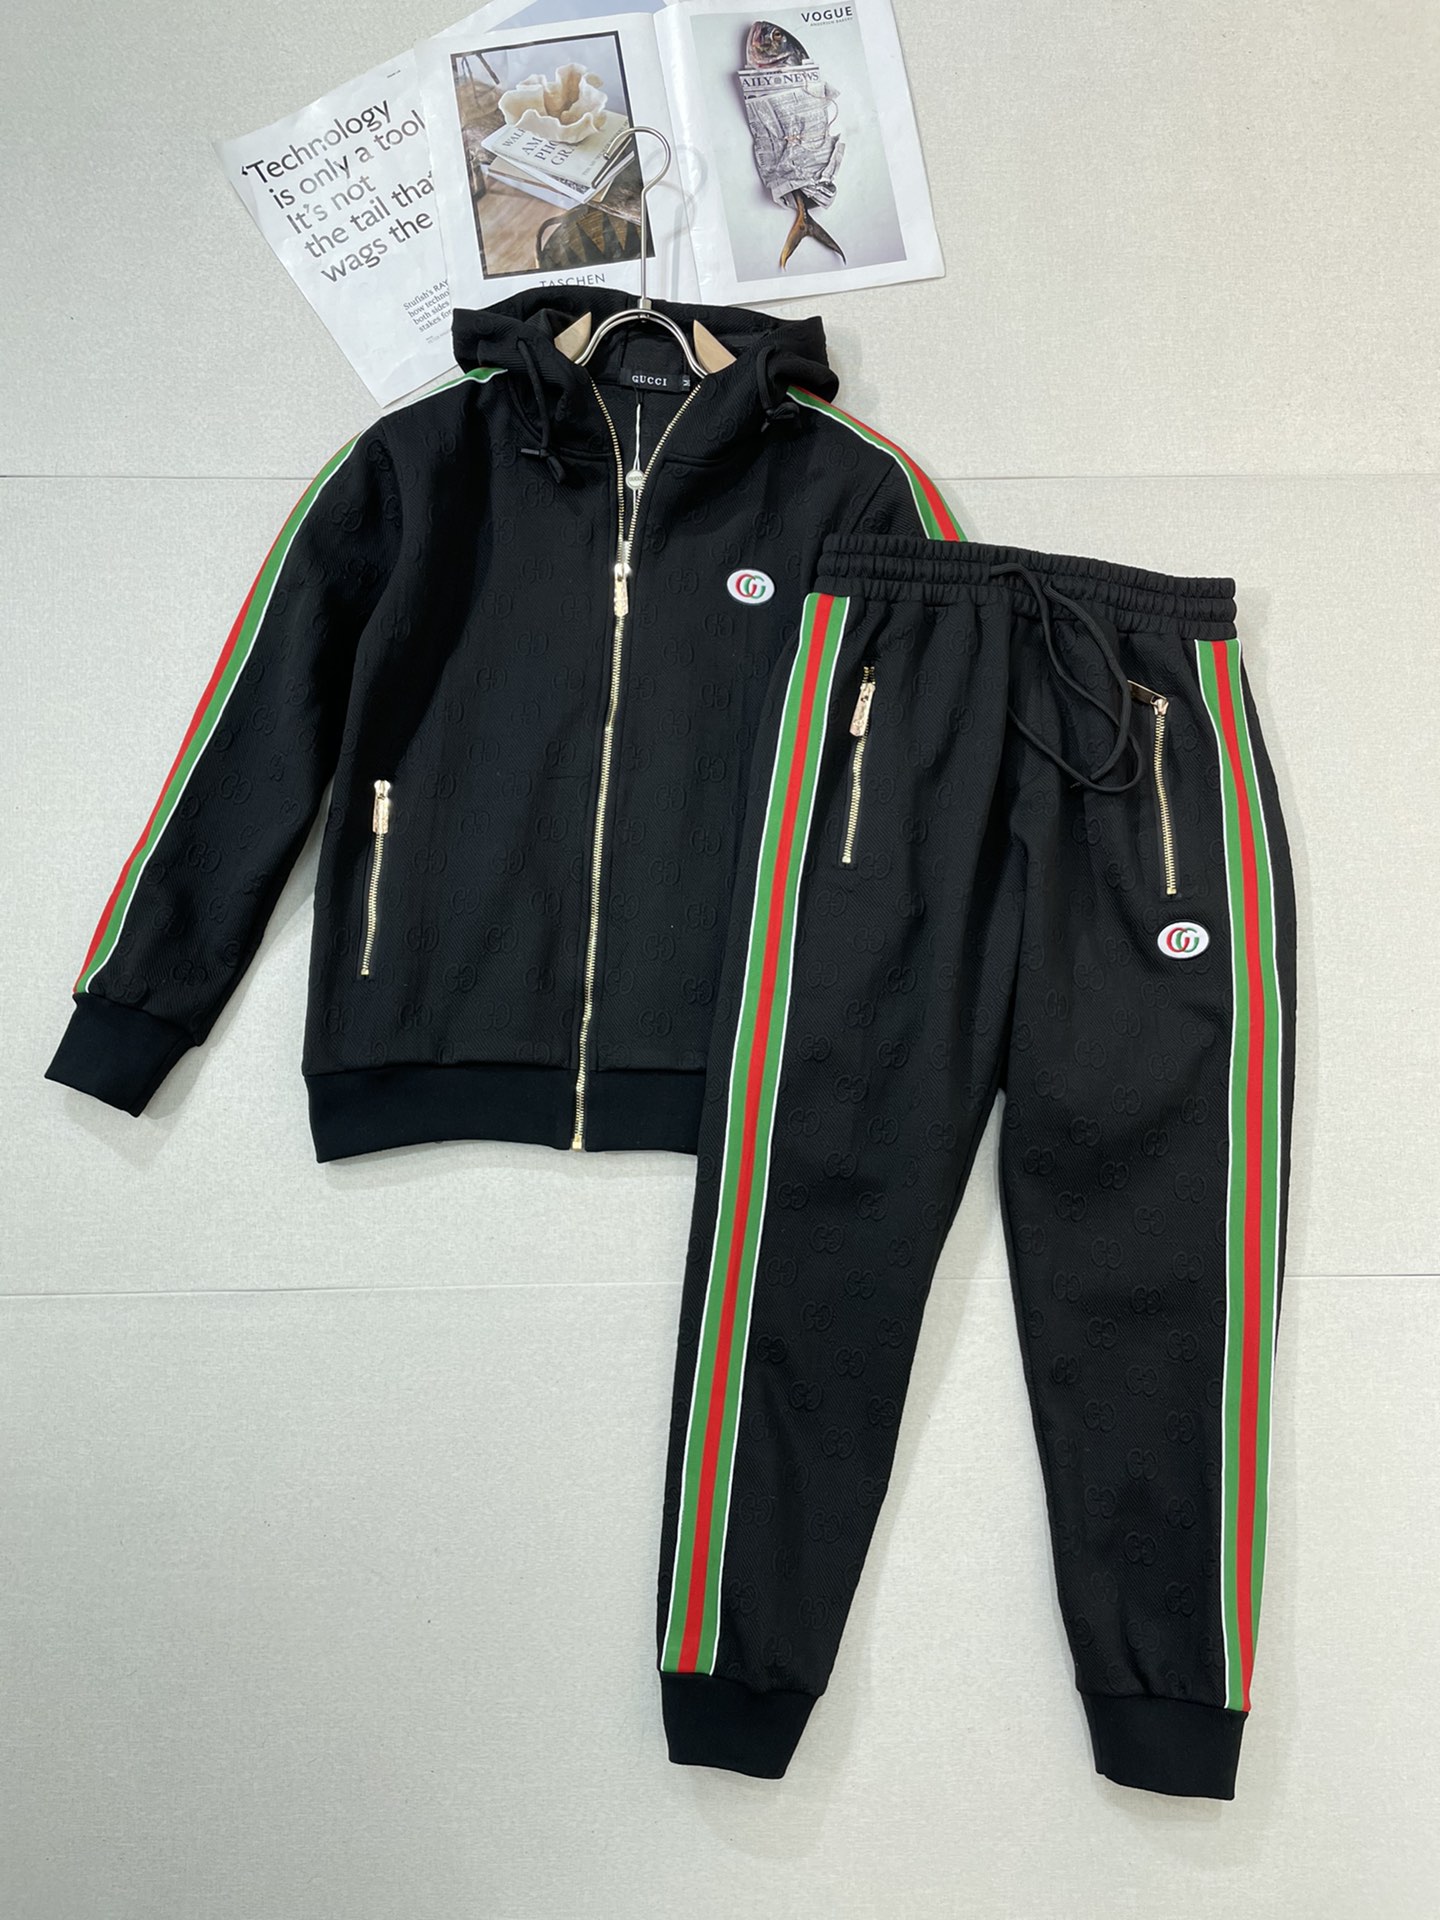 Gucci Clothing Two Piece Outfits & Matching Sets Fall/Winter Collection Fashion Hooded Top